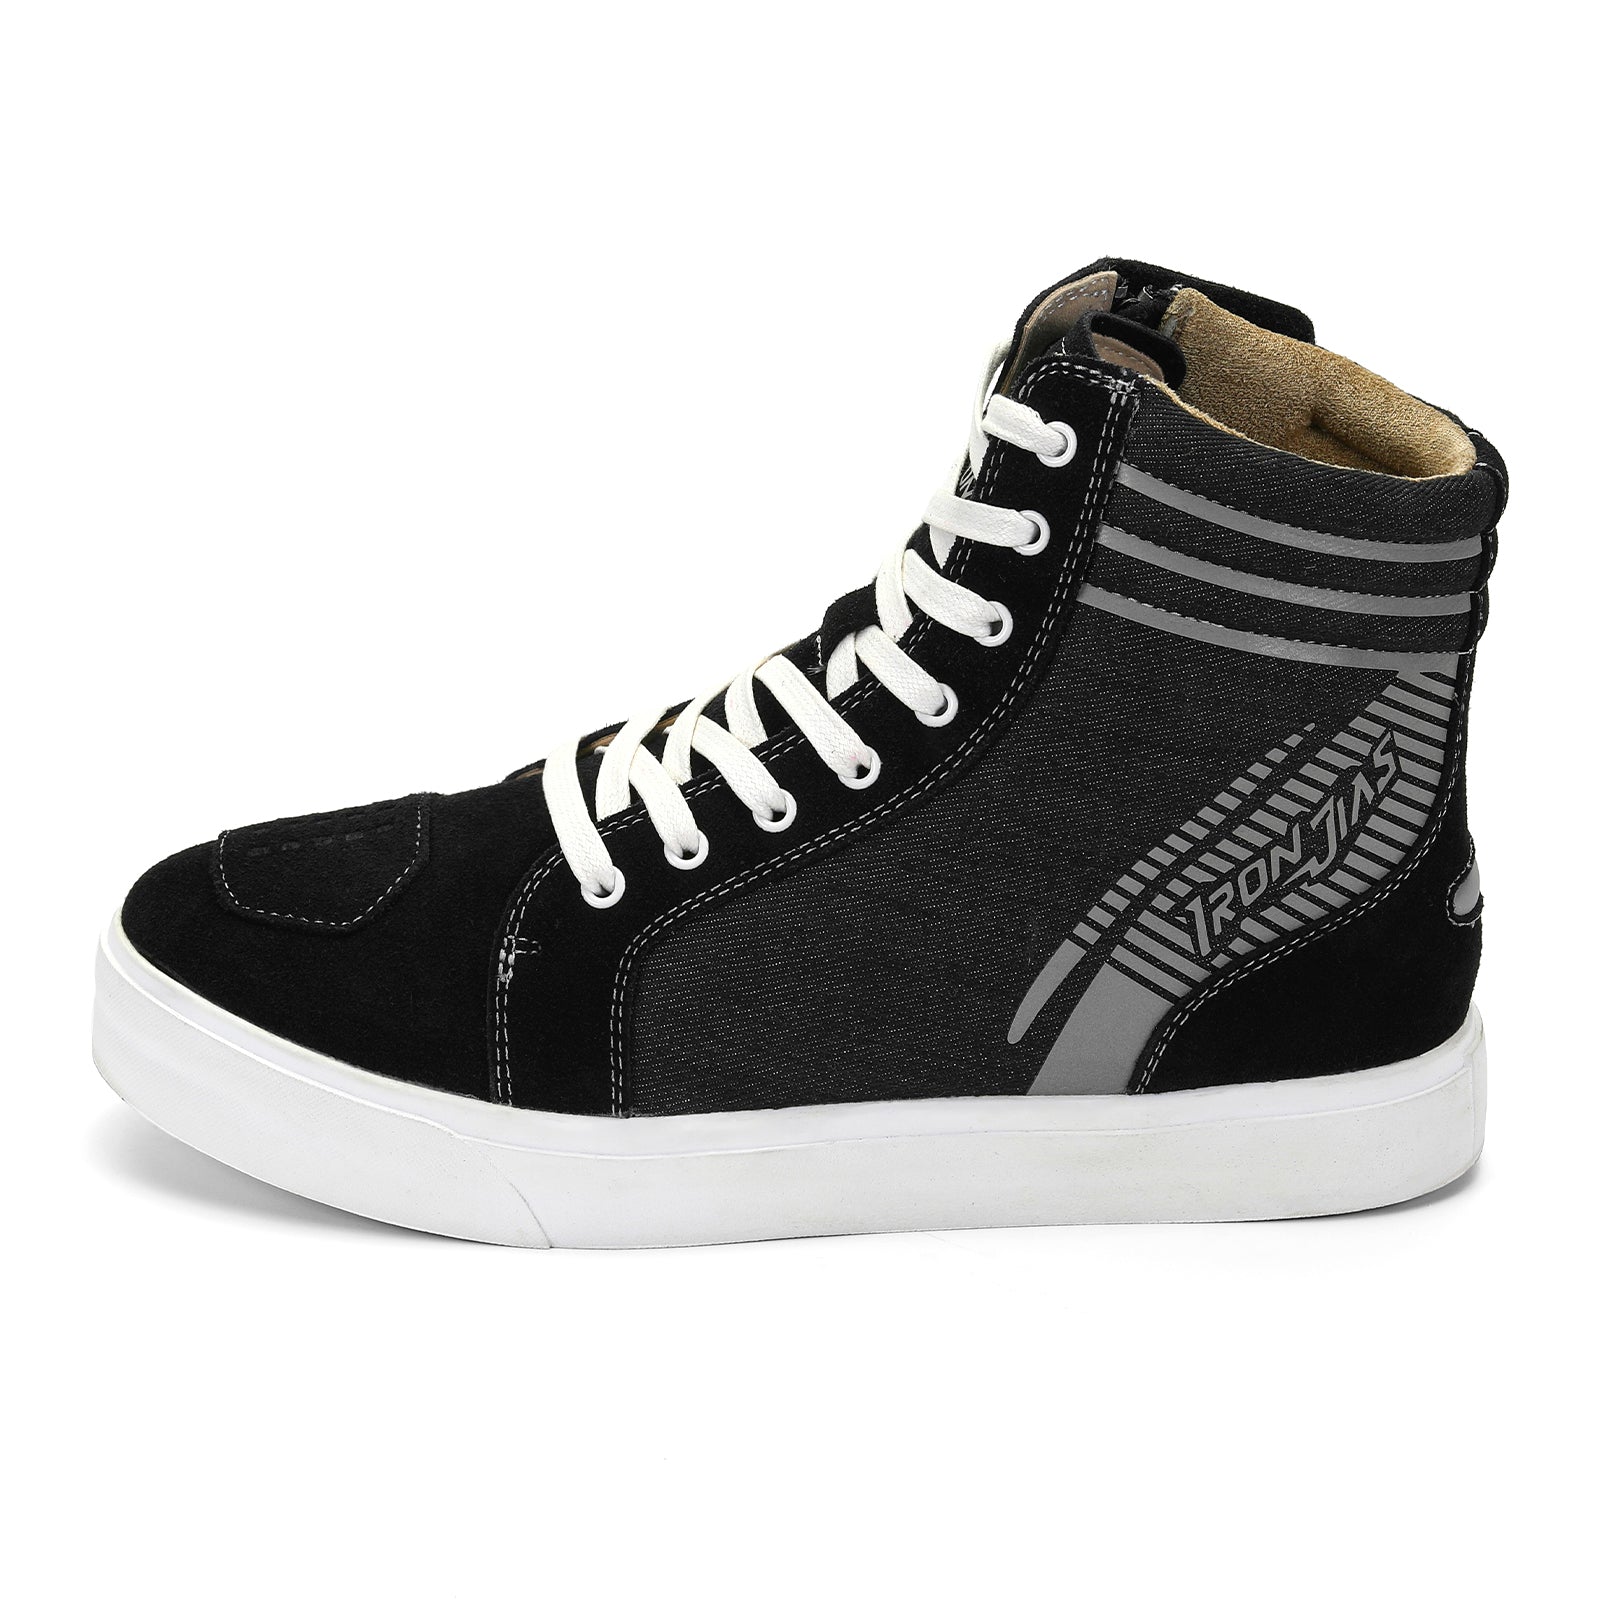 Urban breathable Anti-Slip Motorcycle Shoes For Men